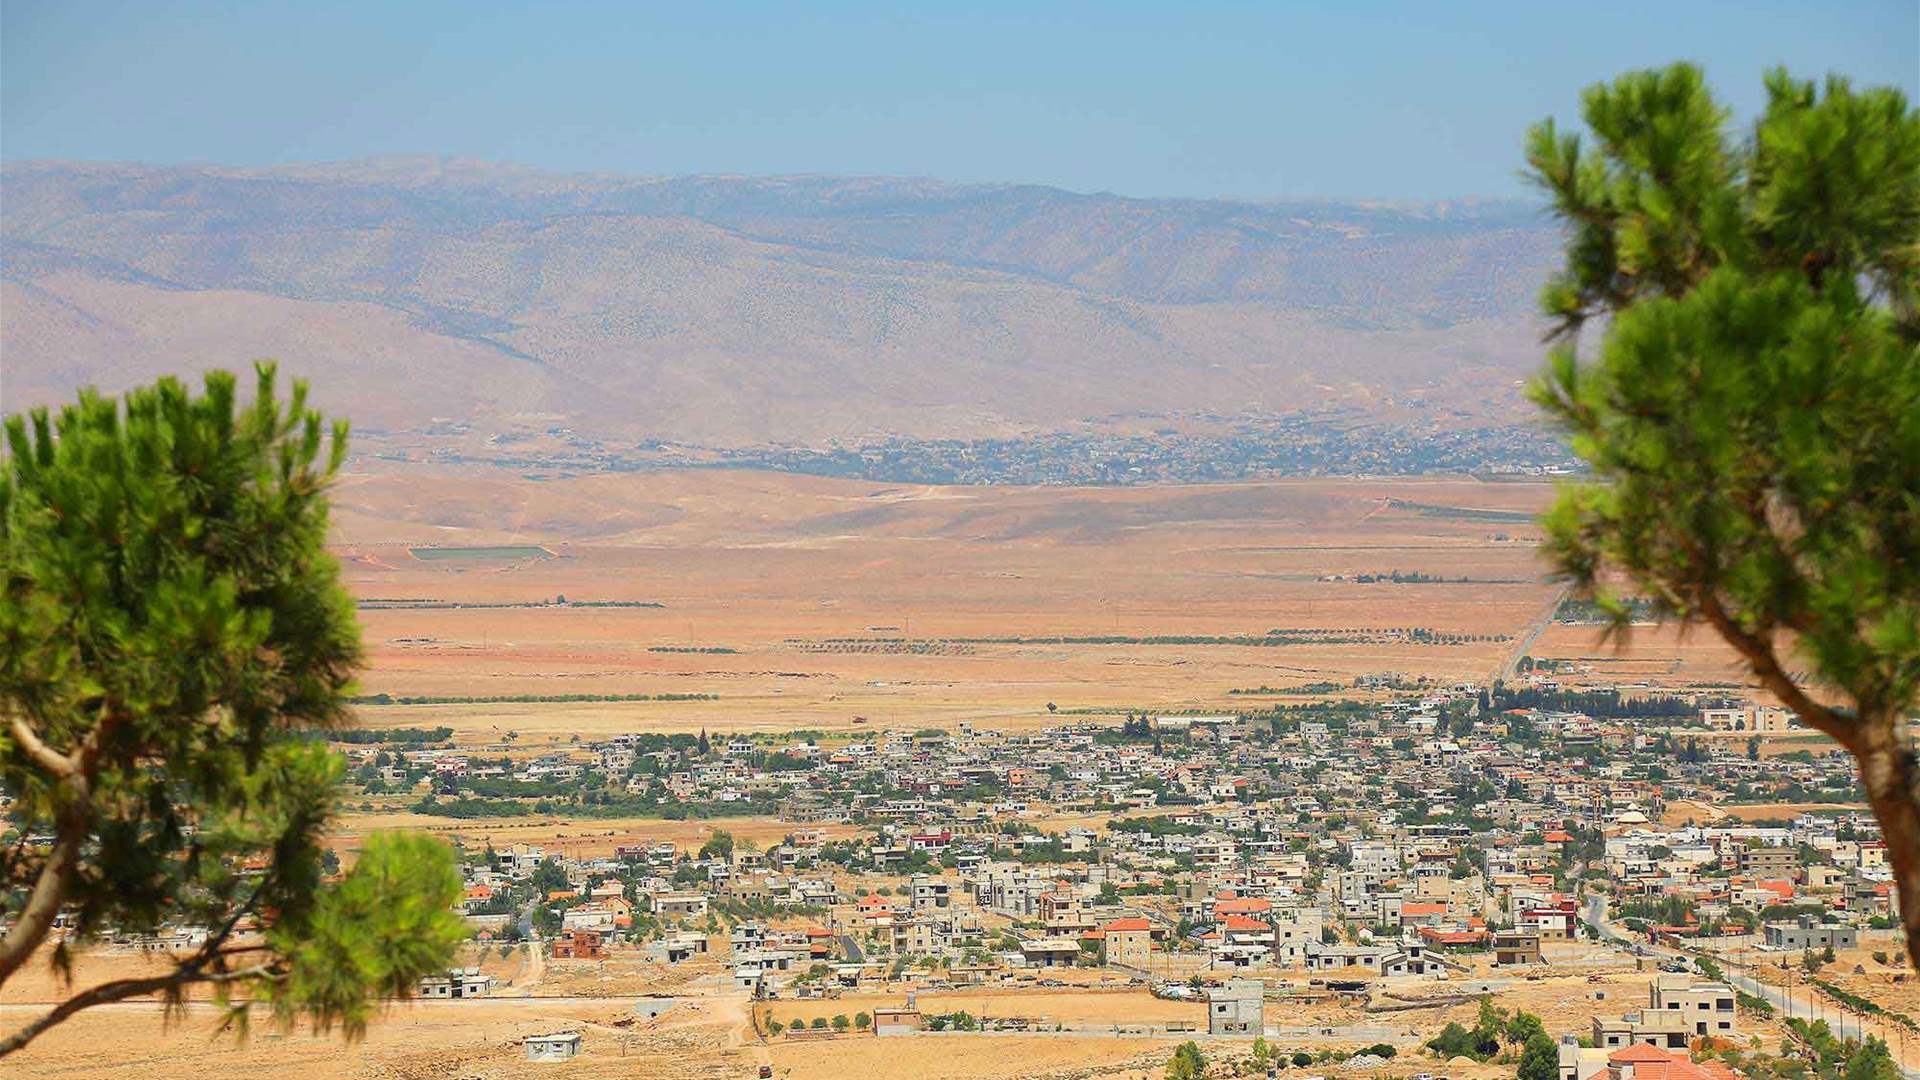 Syrian refugees accused of theft and vandalism in Lebanon&#39;s Bekaa Valley